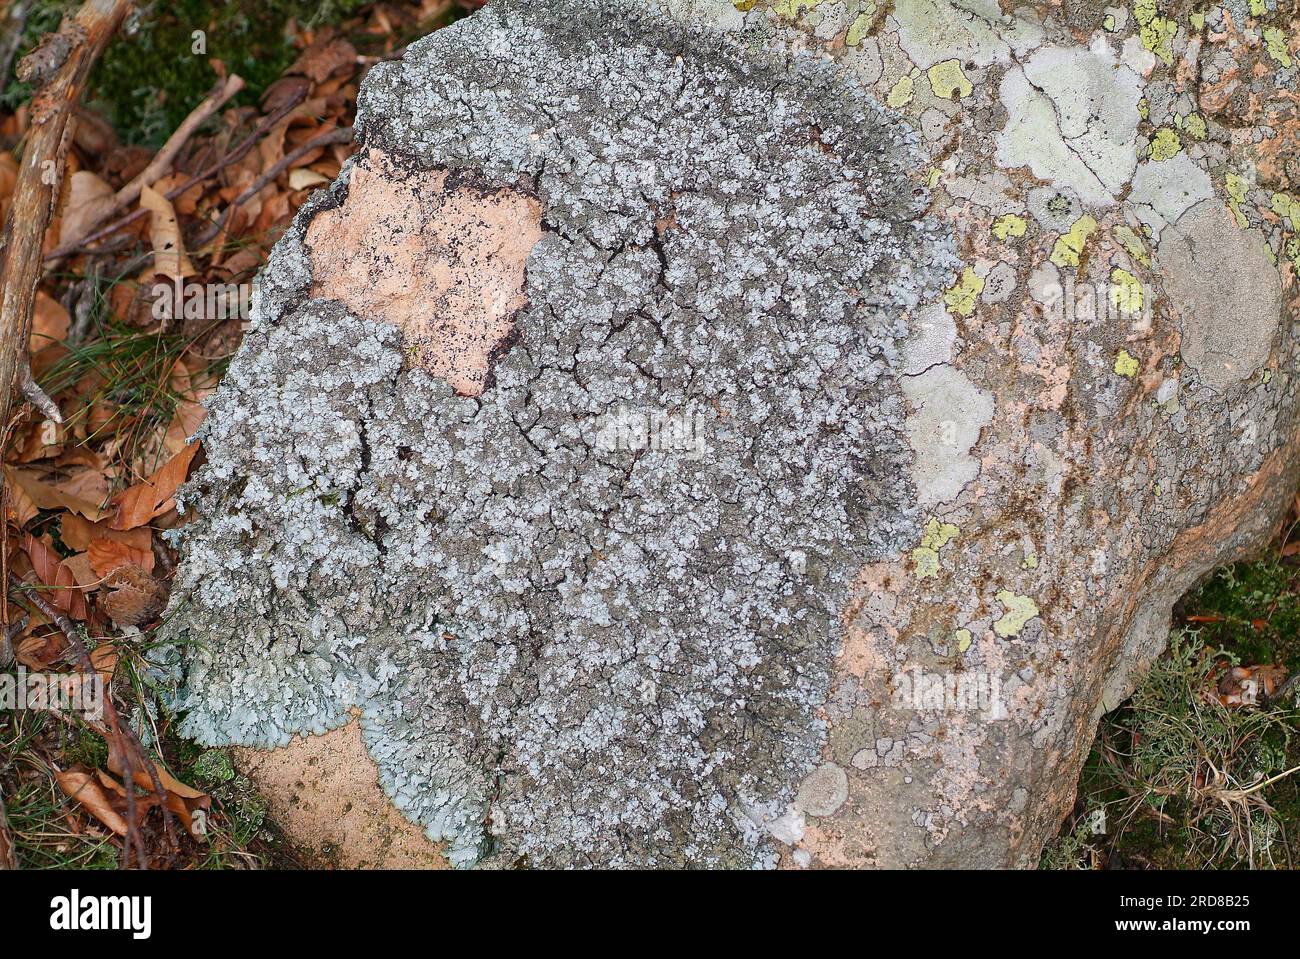 Diploicia canescens is a crustose lichen with a blue-gray thallus. Fungi. Ascomycota. Caliciaceae. This photo was taken in Montseny Biosphere Reserve, Stock Photo